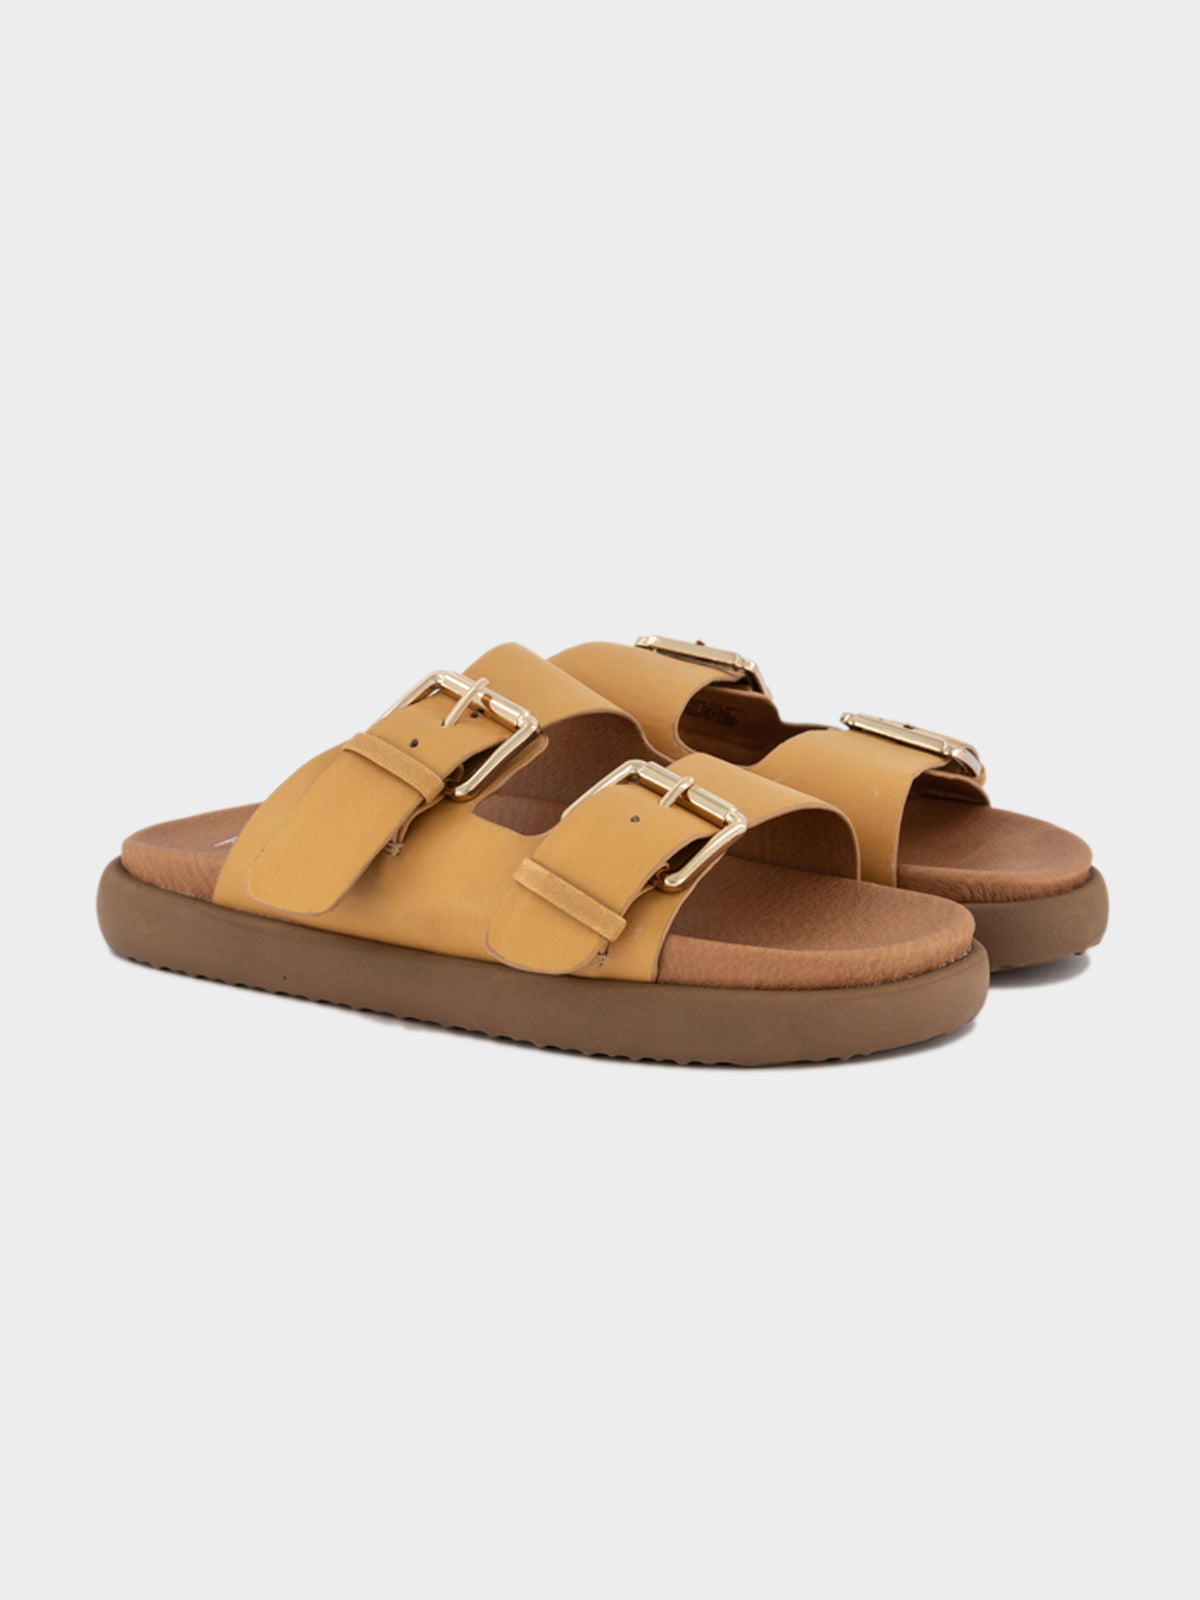 Womens Ultralite Buckle Sandal in Natural Leather